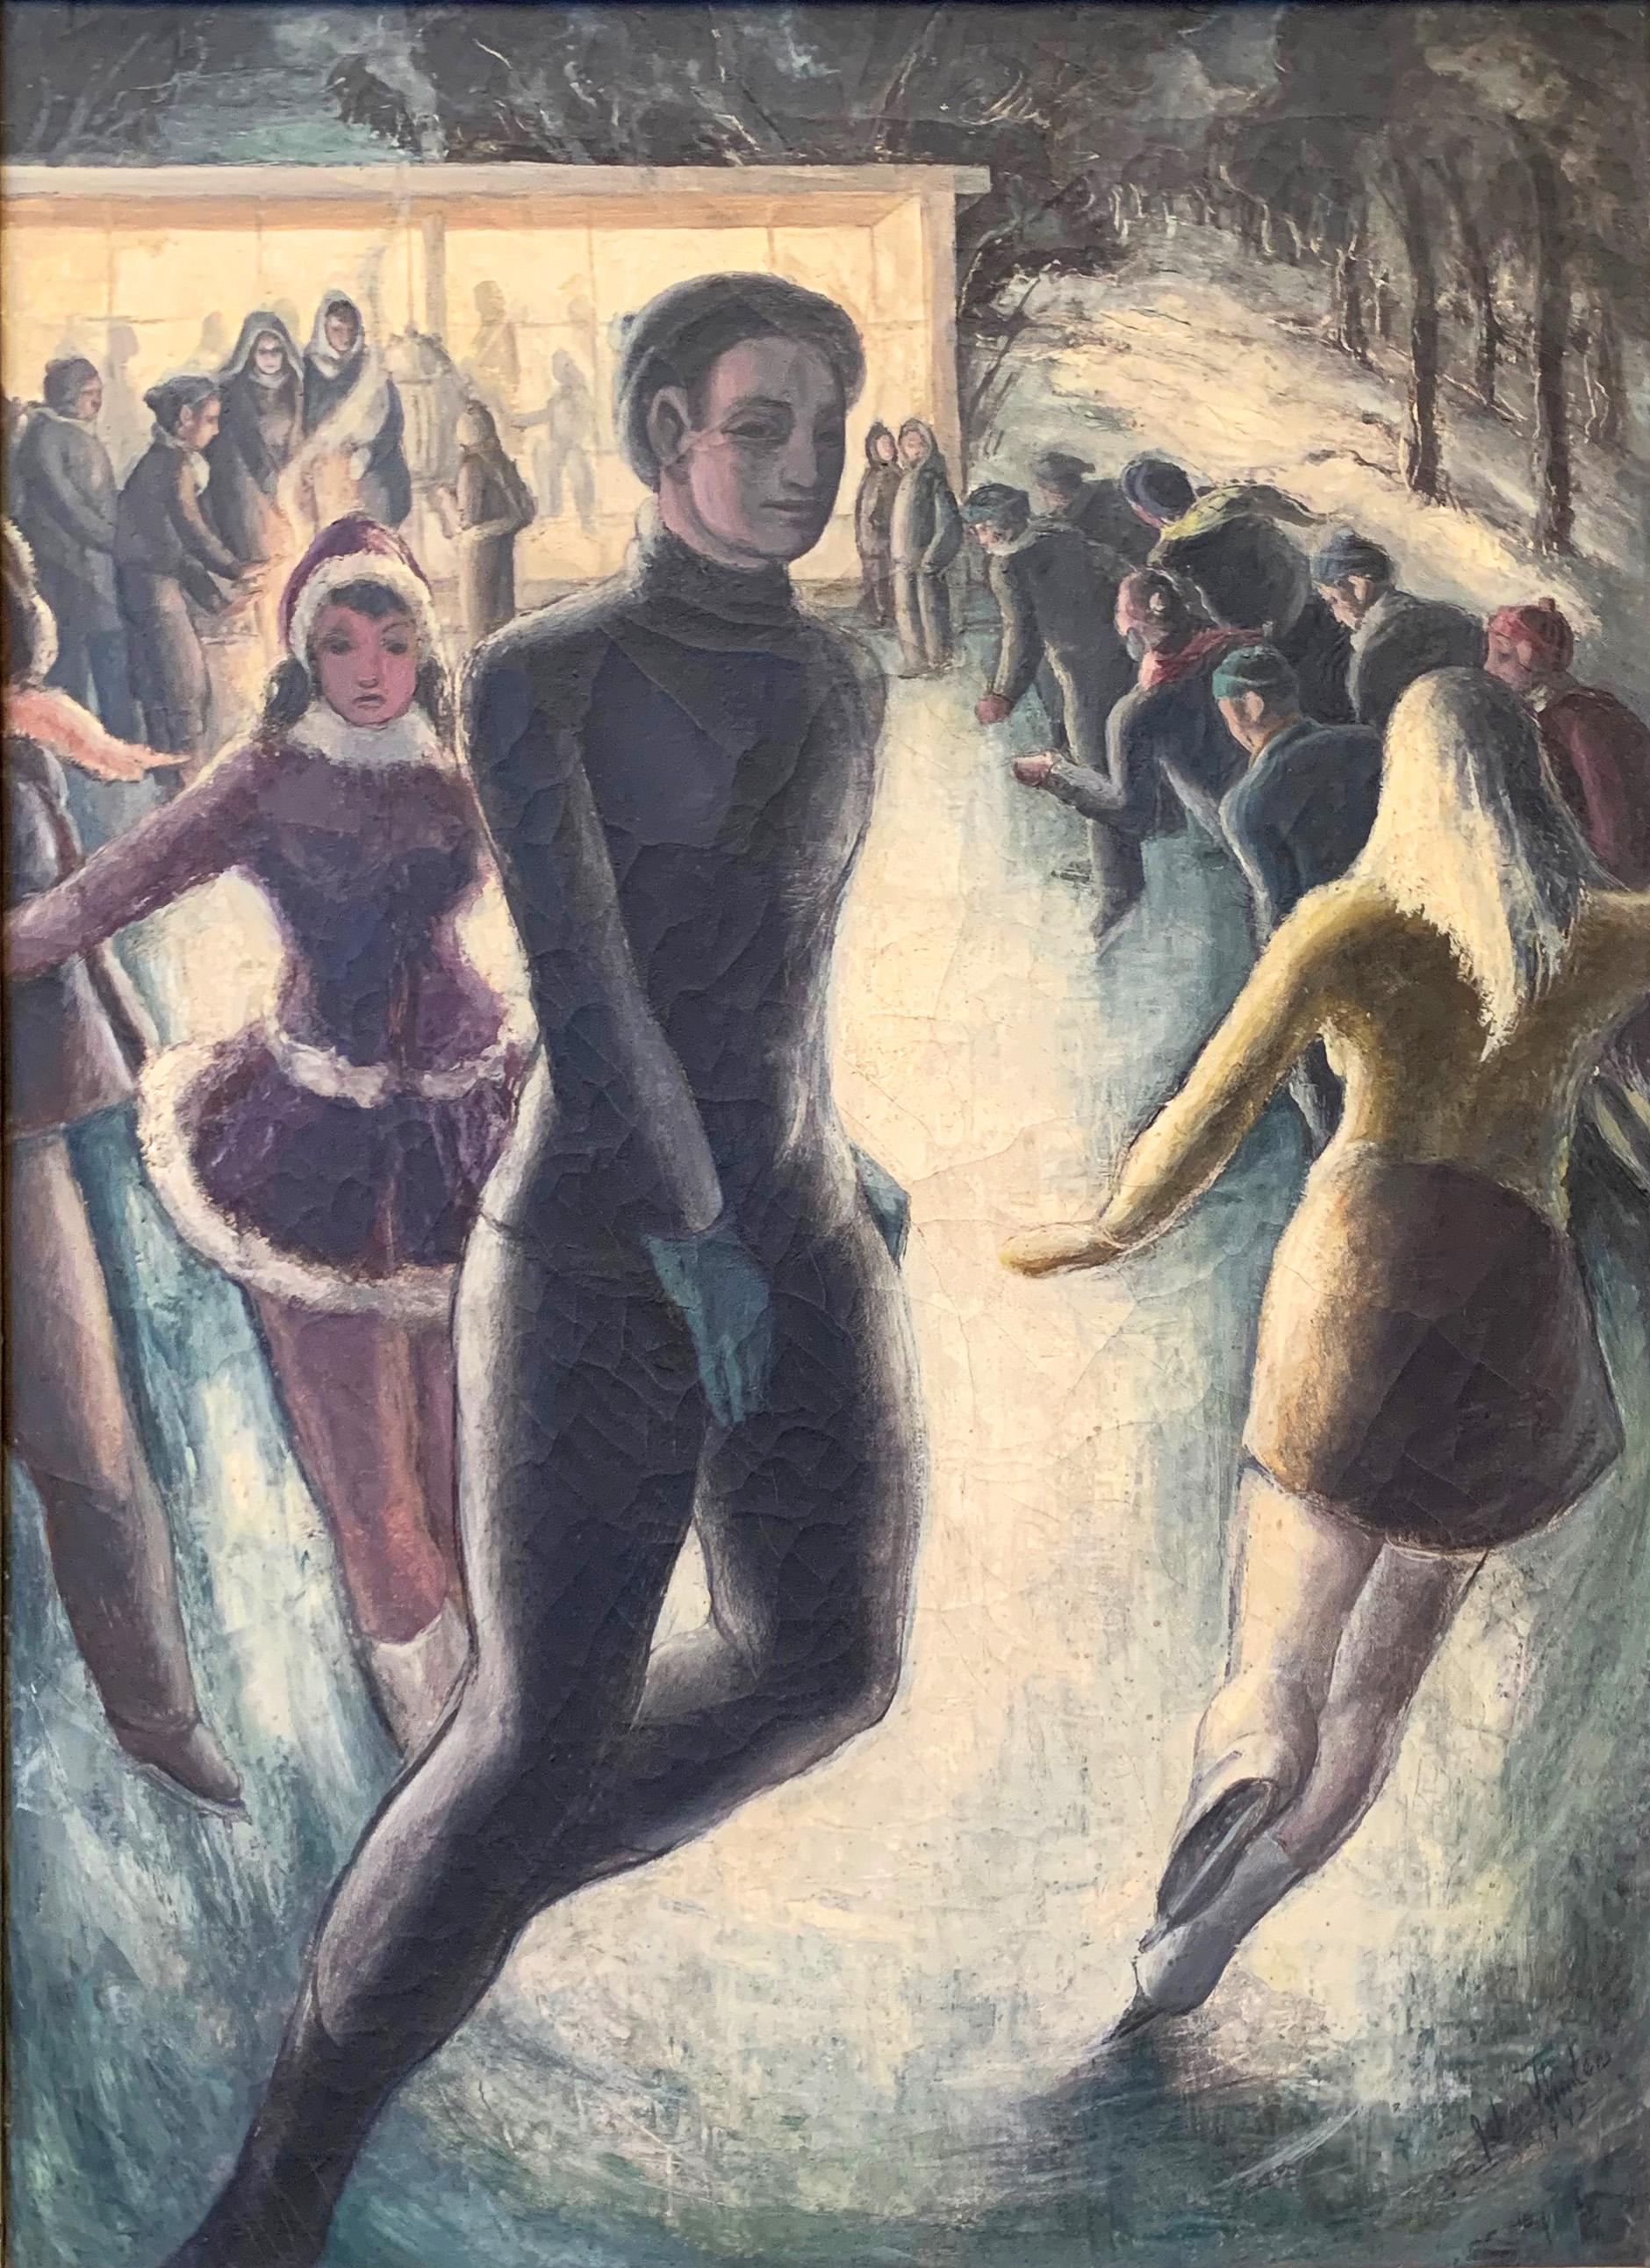 Painted with great verve and energy, this depiction of a circle of ice skaters circumnavigating a rink in Chicago -- perhaps the Lincoln Park Zoo rink -- was made in 1943 by John Winters, winning a prize in the Philadelphia area over a decade later.